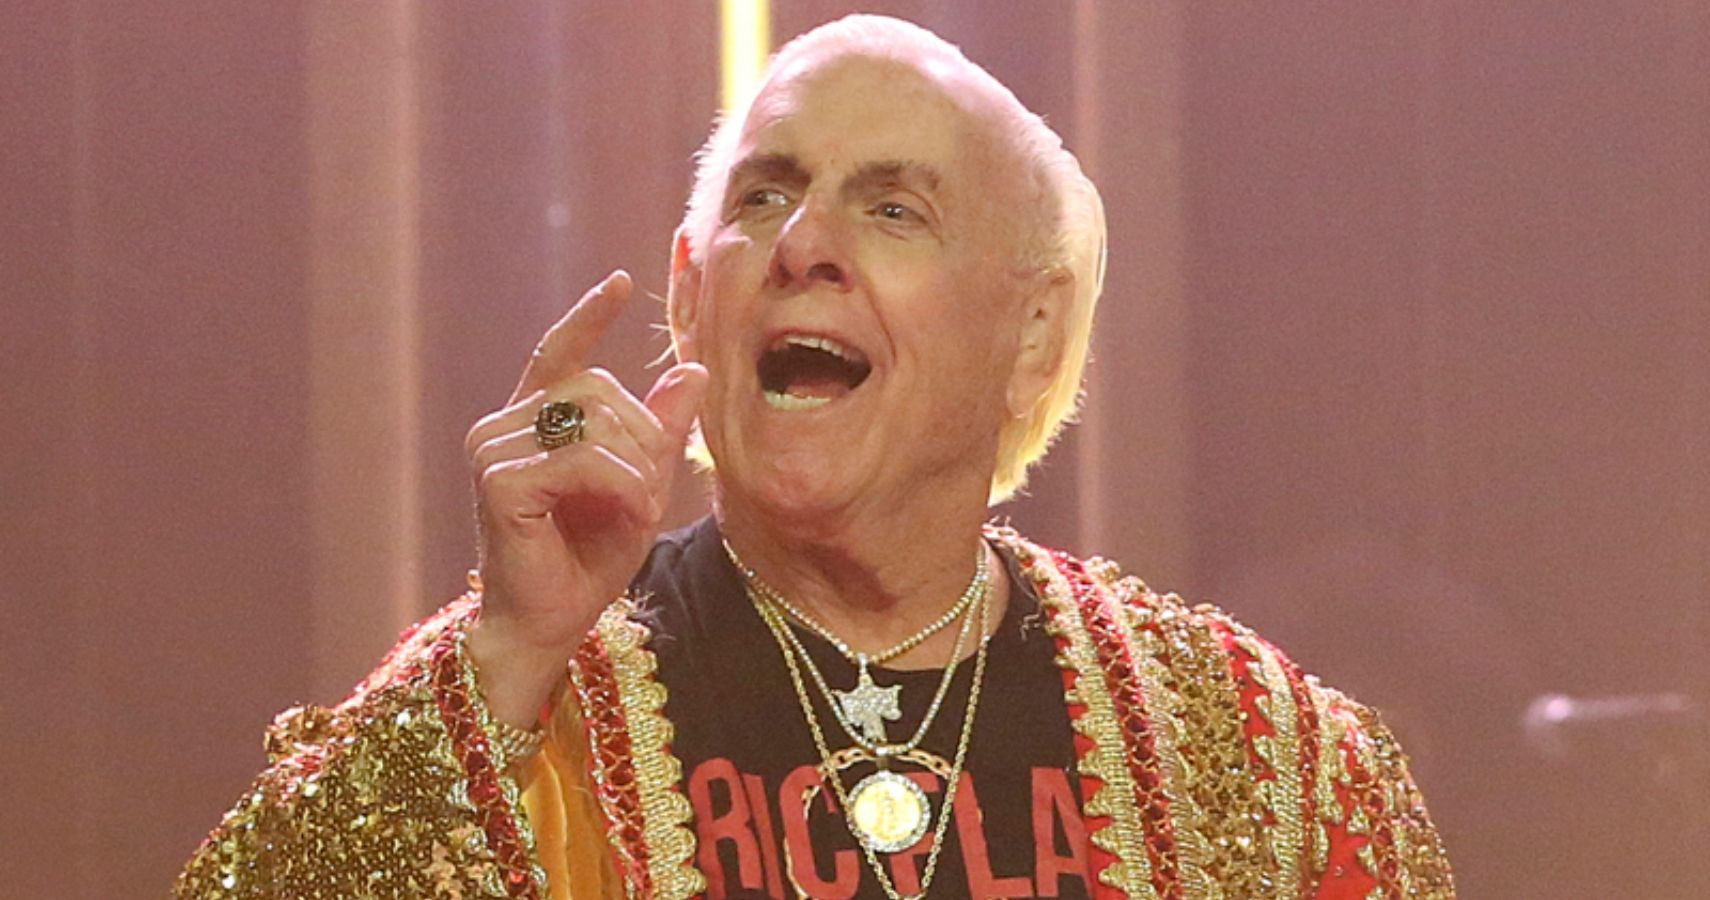 9. Ric Flair's Matching "Space Mountain" Tattoos with Shawn Michaels - wide 6